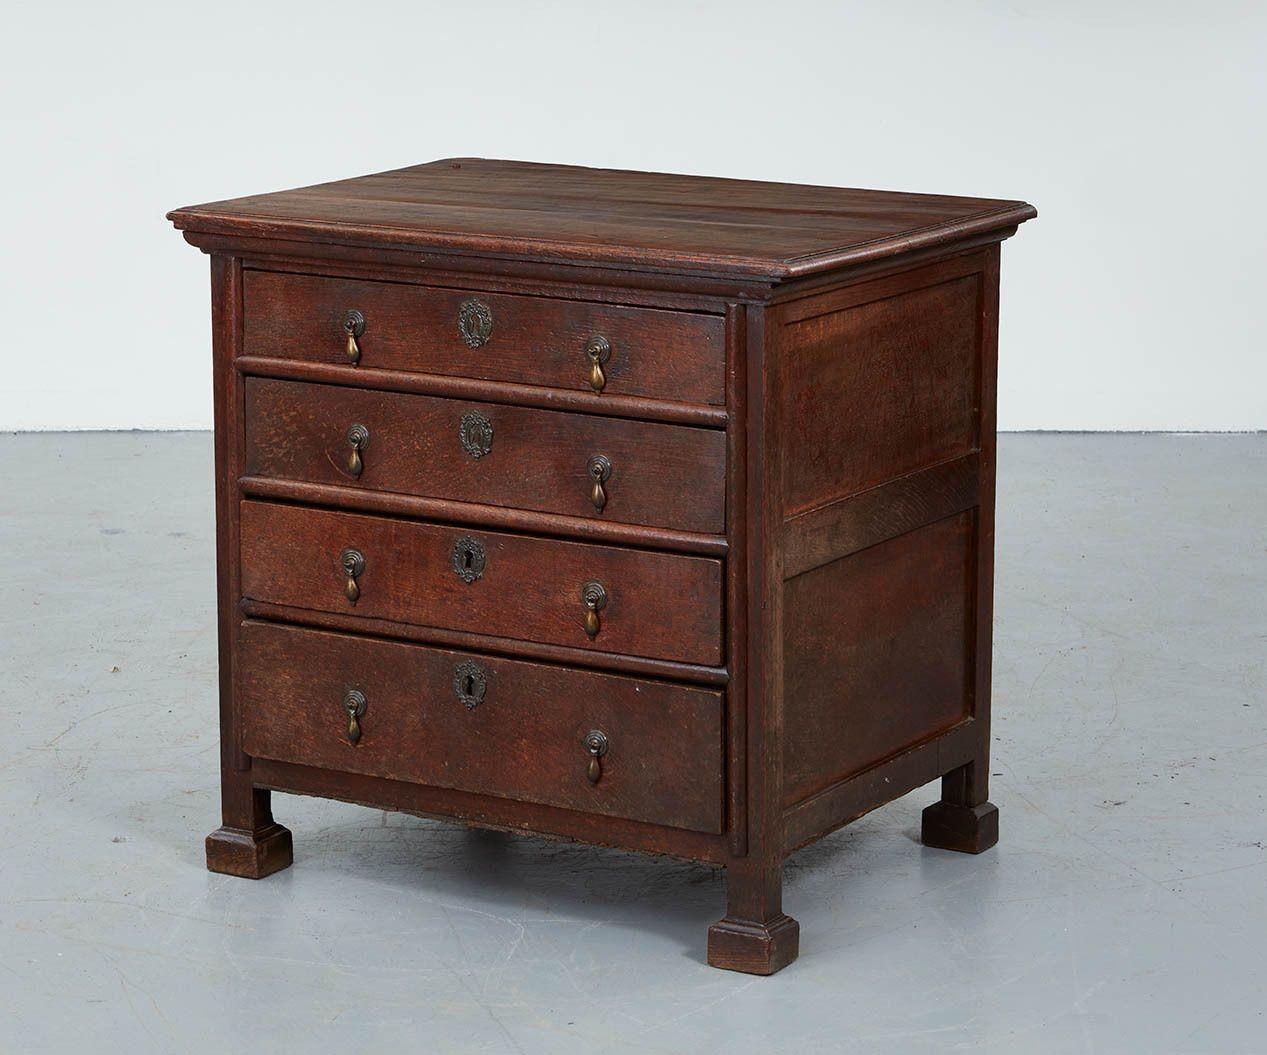 An 18th century oak dresser with pronounced cornice around top over three drawers plus one deeper drawer all with drop pulls and escutcheons, on tall stile legs with molded block feet.  A rare and distinctive form associated with the East Anglian